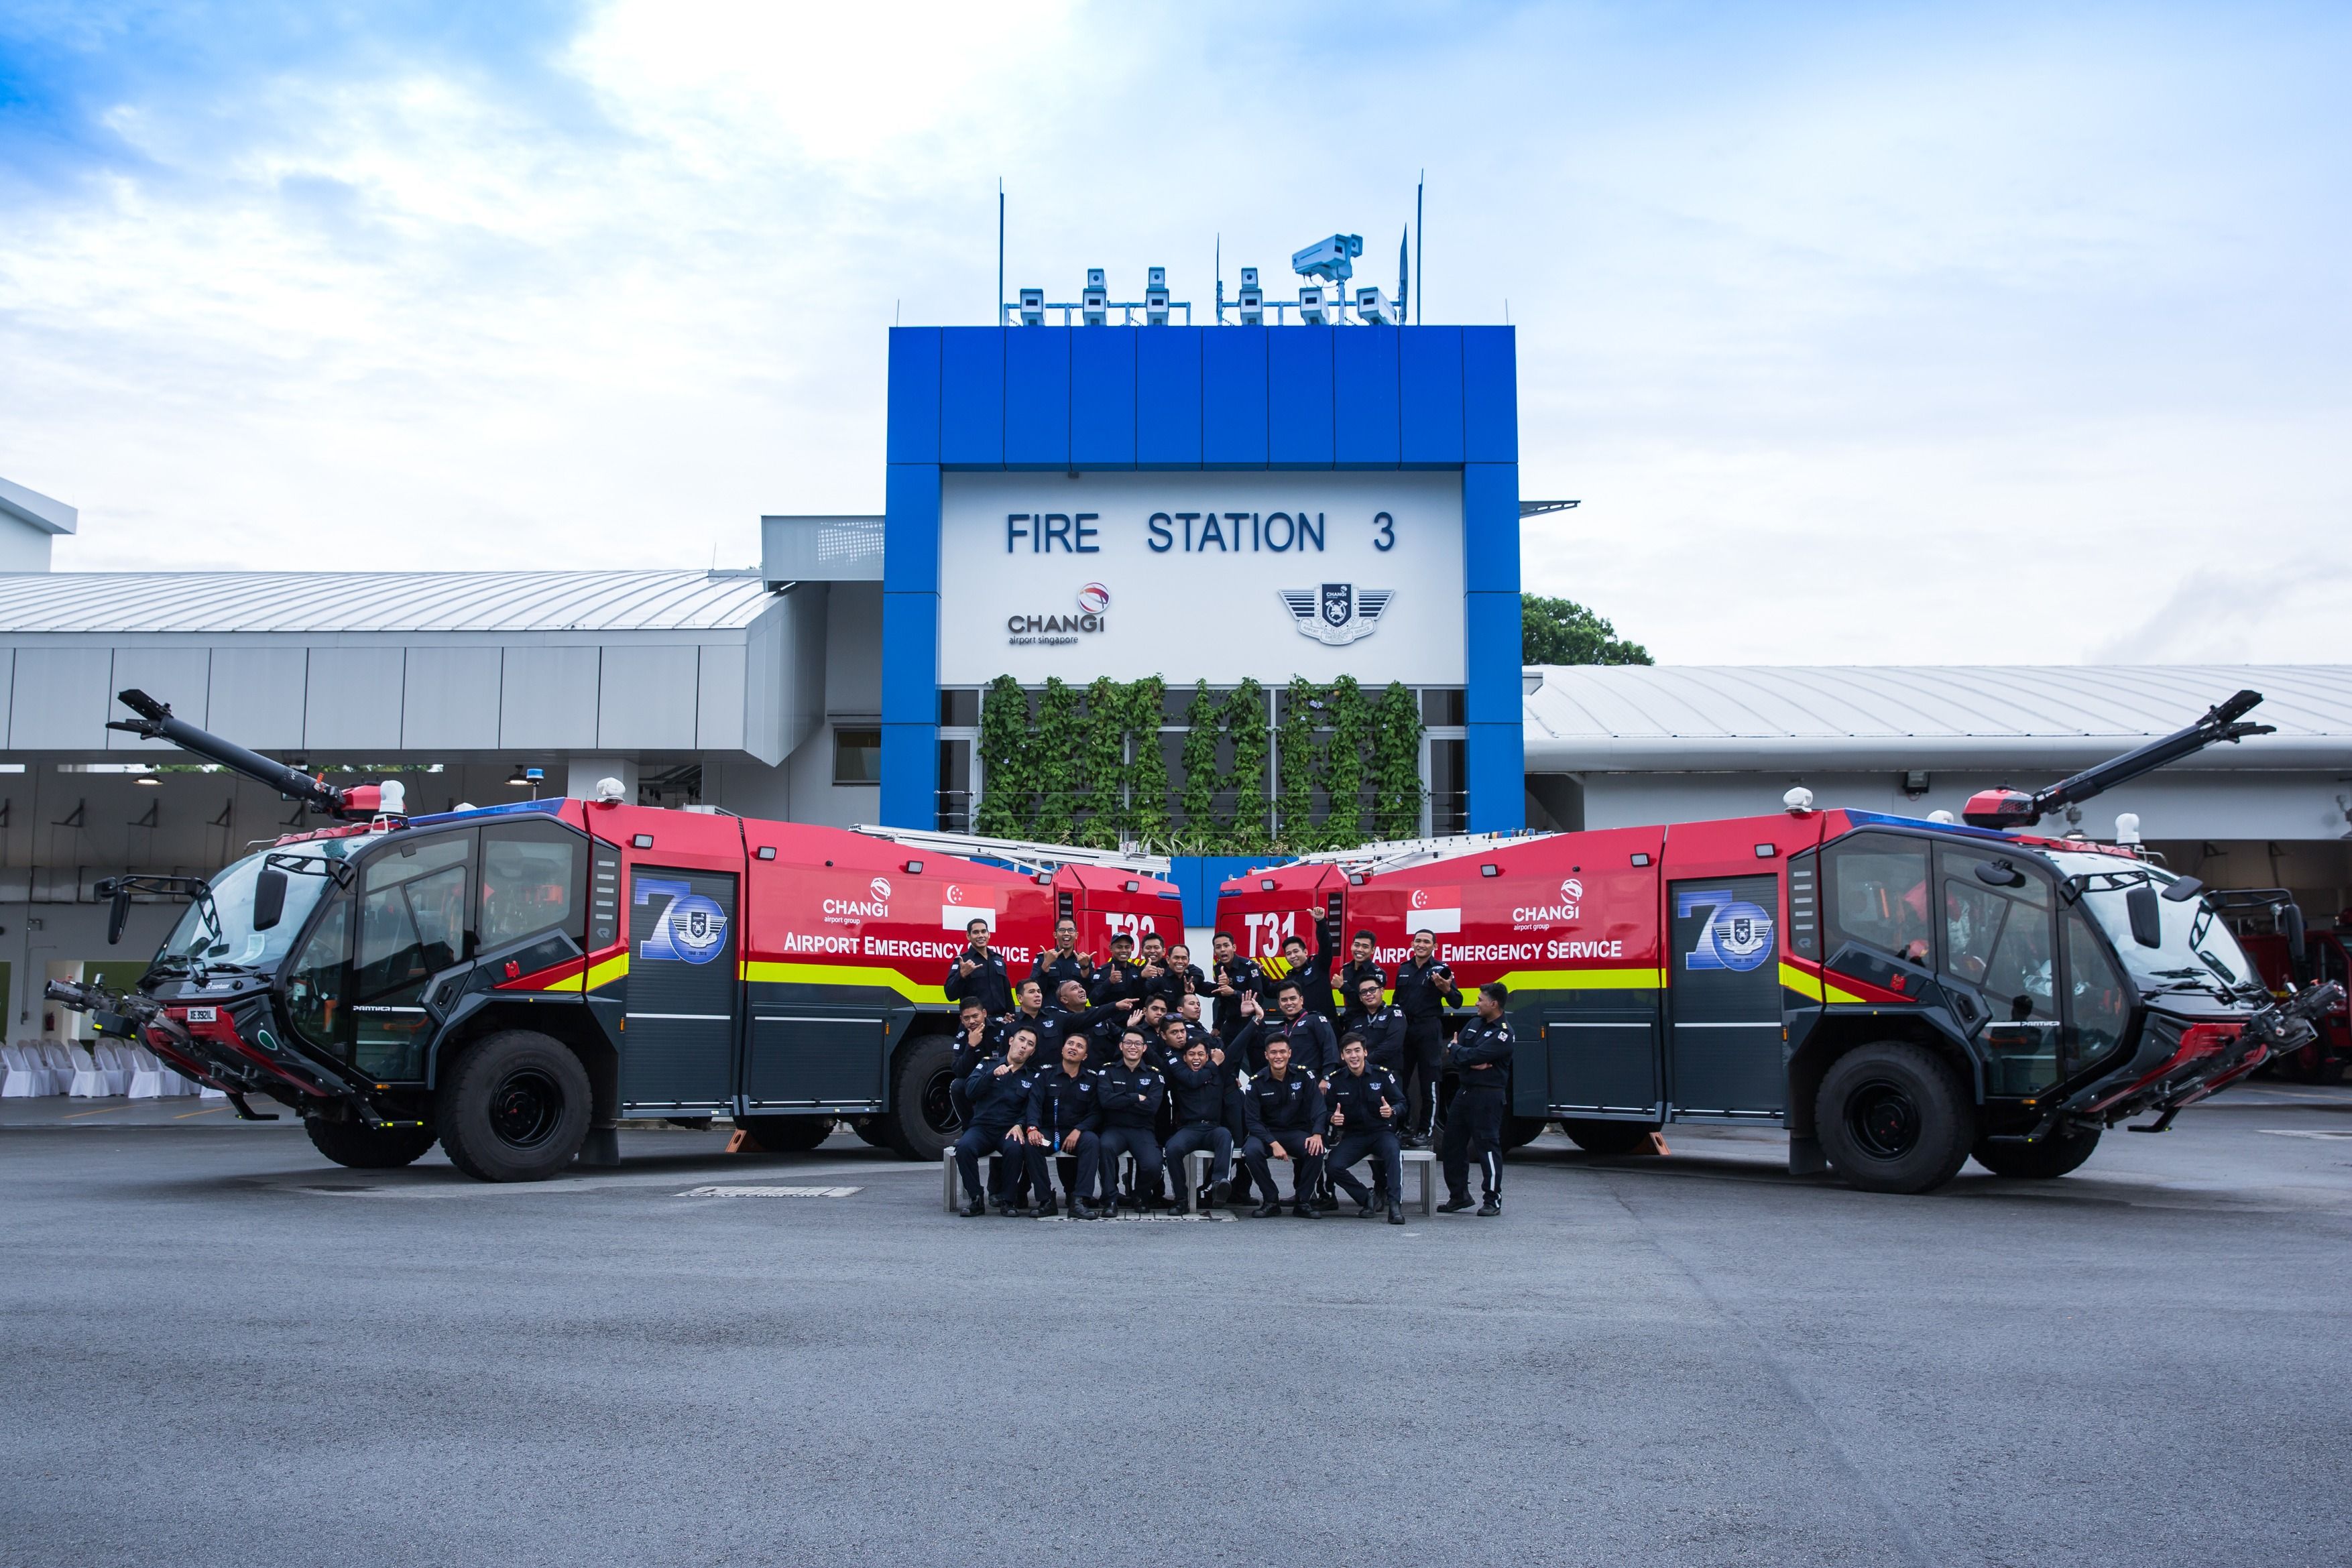 Fire Trucks and Firefighters outside the Fire Station at Singapore Changi Airport.